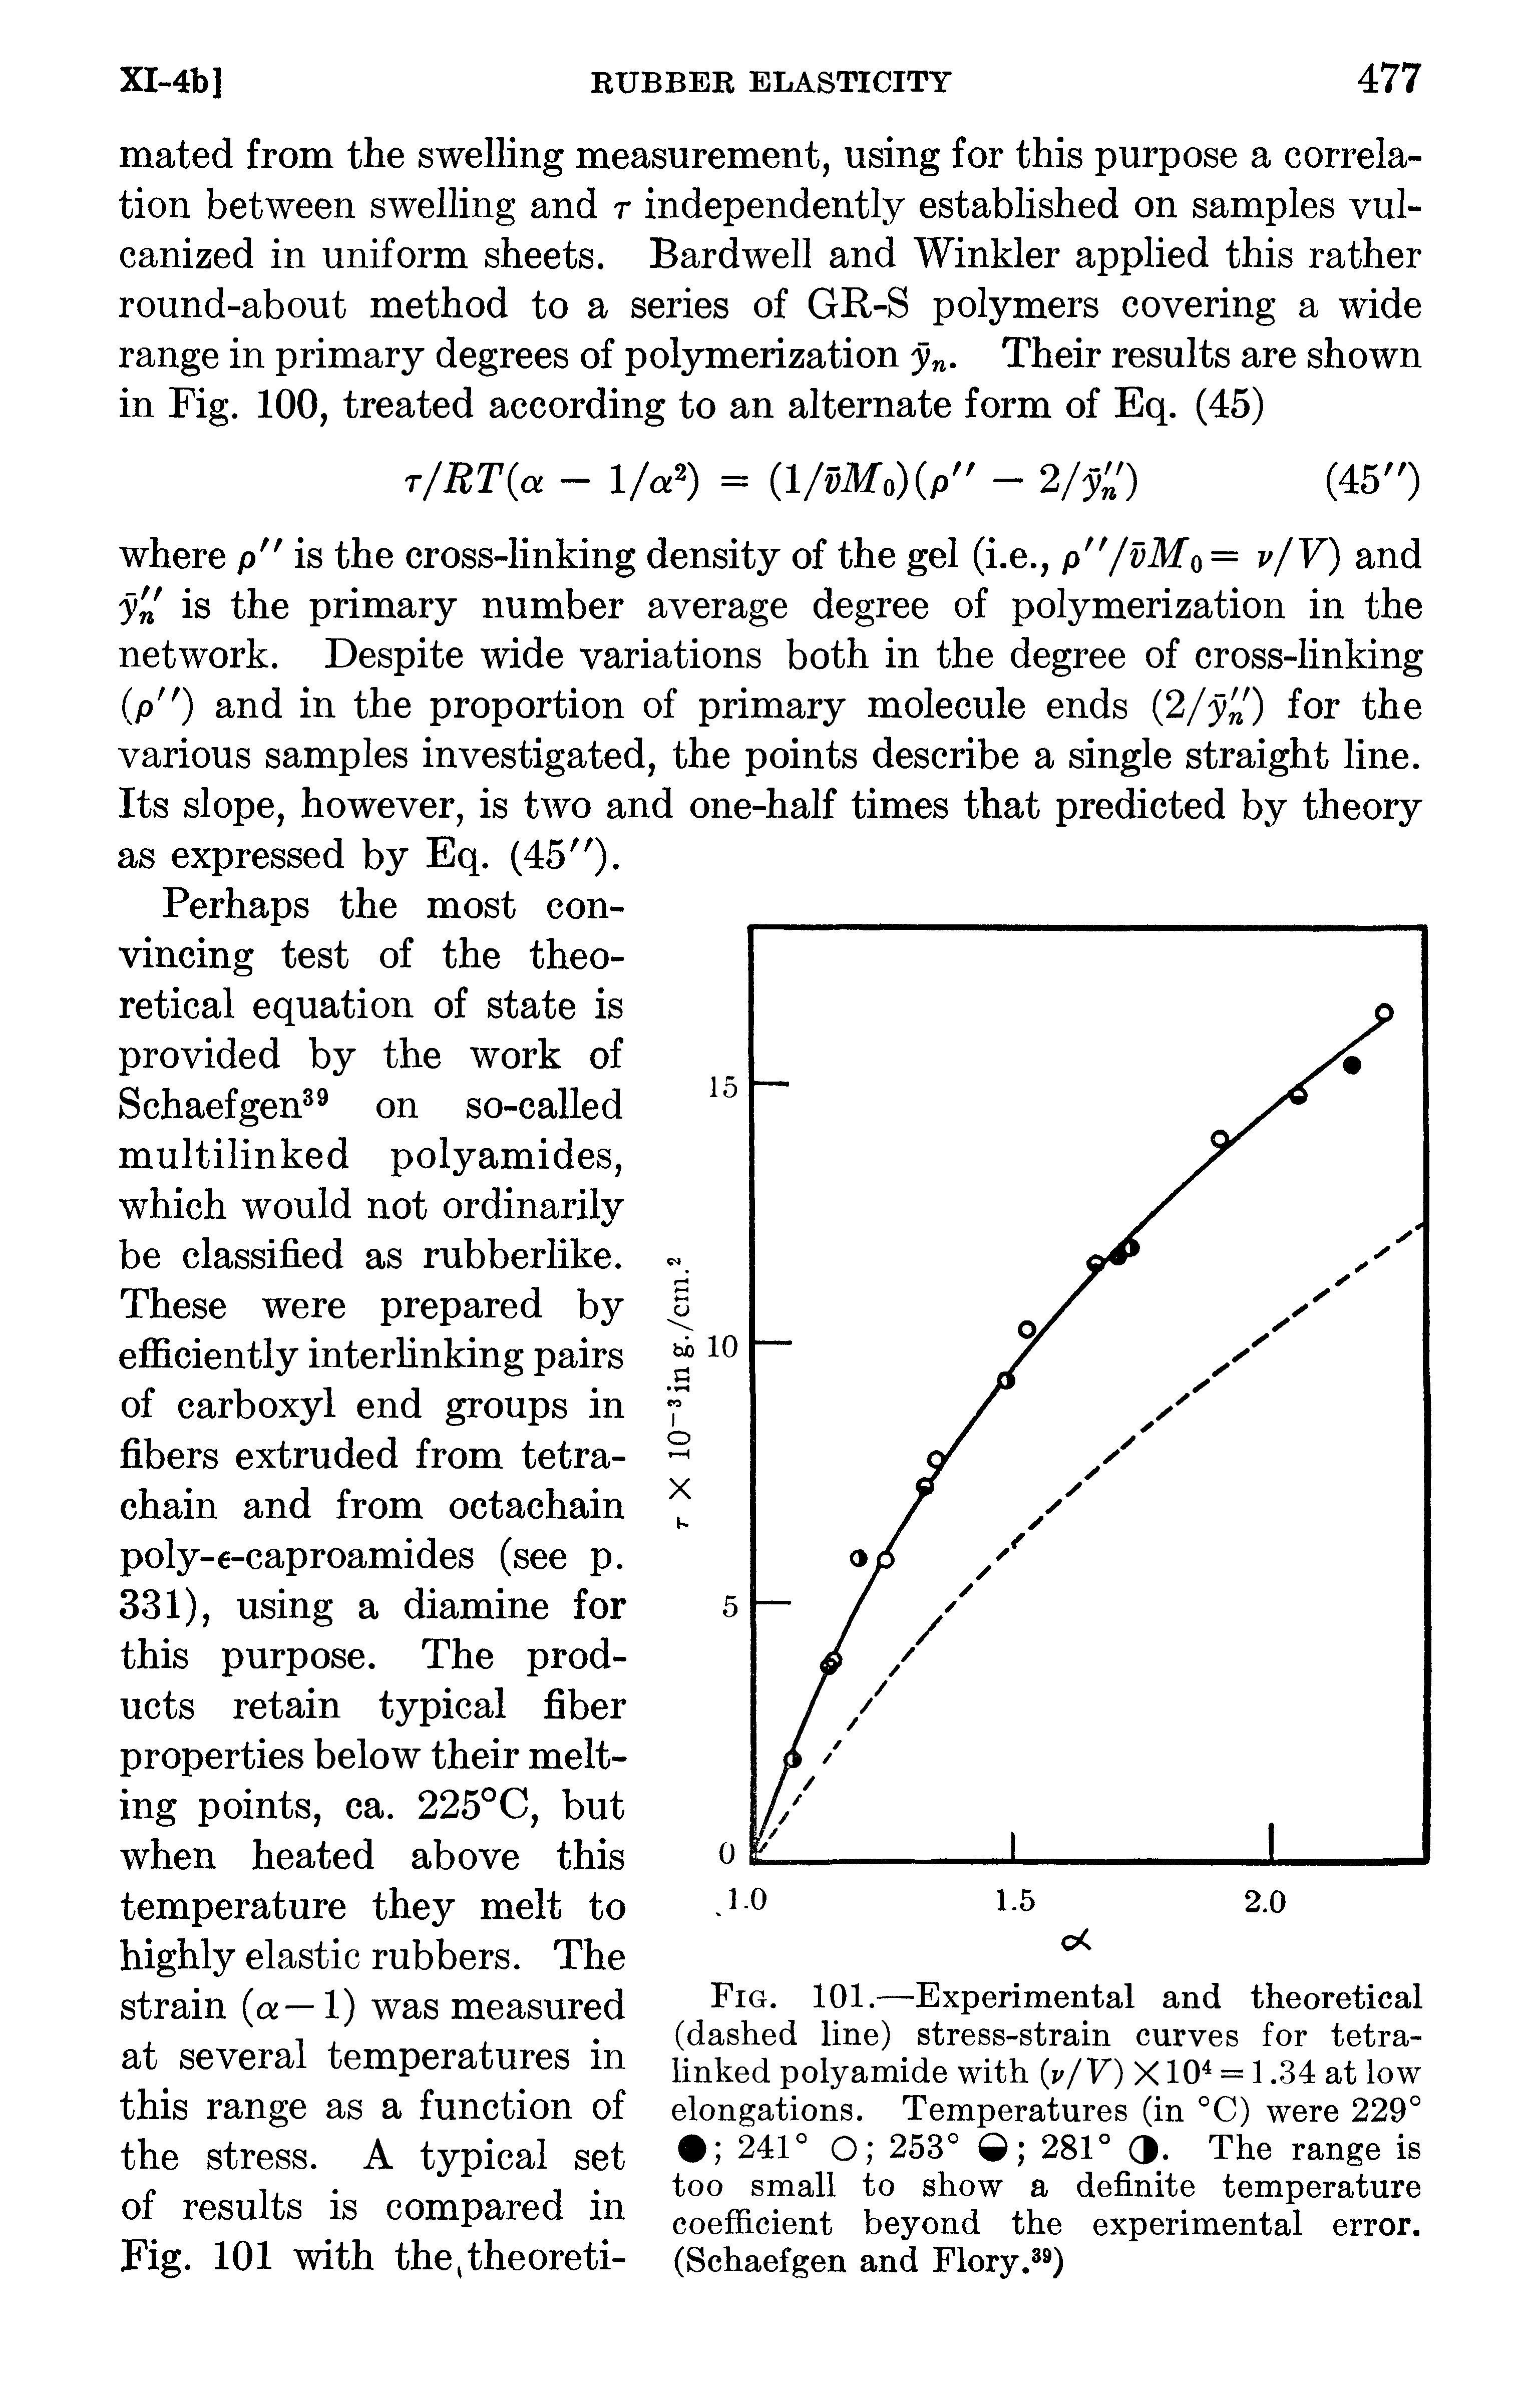 Fig. 101.—Experimental and theoretical (dashed line) stress-strain curves for tetra-linked polyamide with y/V) X10 = 1.34 at low elongations. Temperatures (in °C) were 229° 241° O 253° 281° 3. The range is too small to show a definite temperature coefficient beyond the experimental error. (Schaefgen and Flory. )...